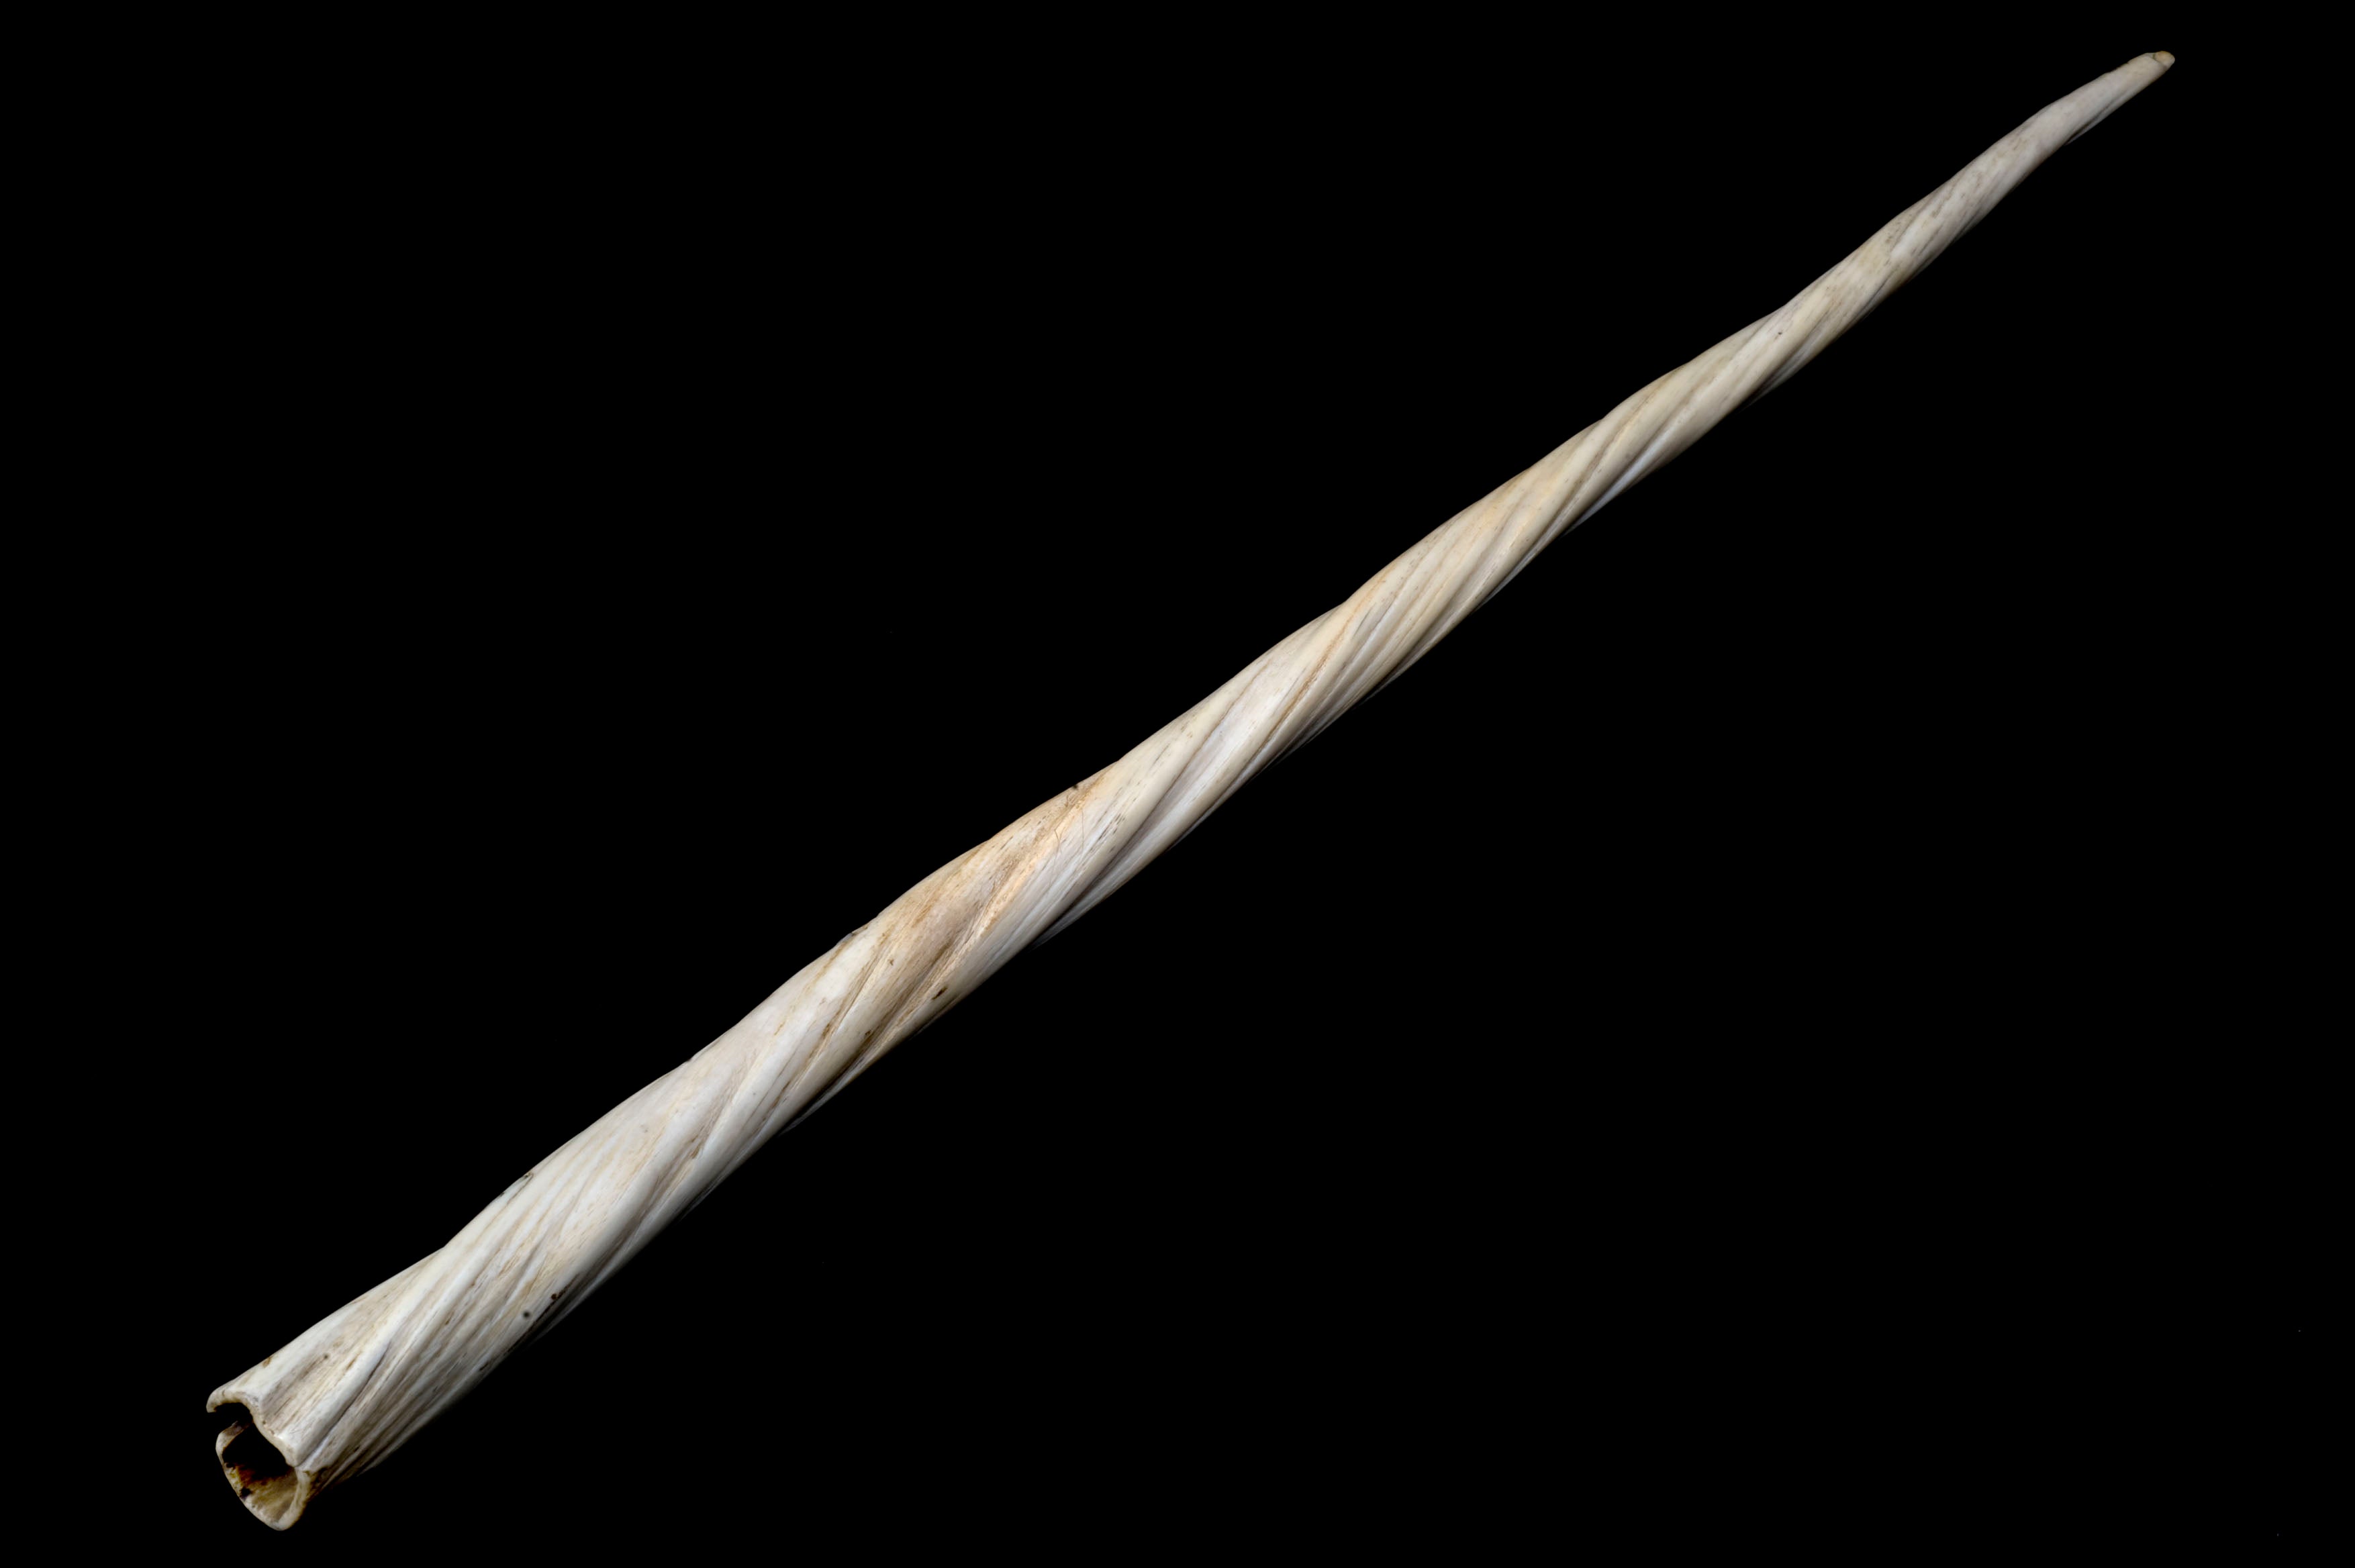 A narwhal tusk